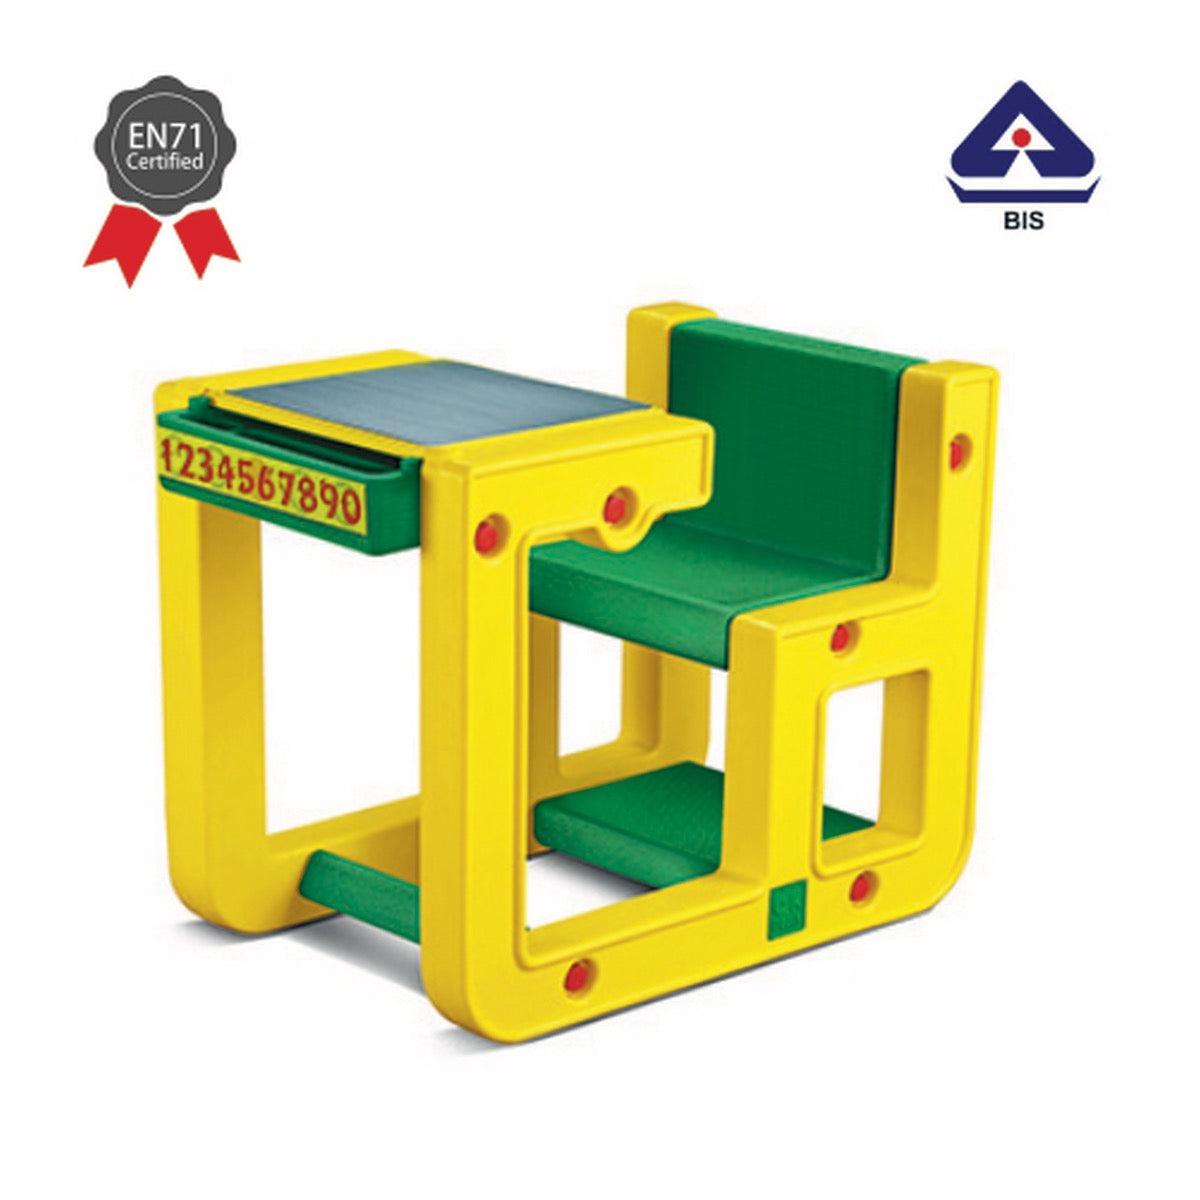 Ok Play Jack In The Box Single, Comfort And Safety For Two Kids, Perfect For Home And School, Yellow & Green, 2 to 4 Years